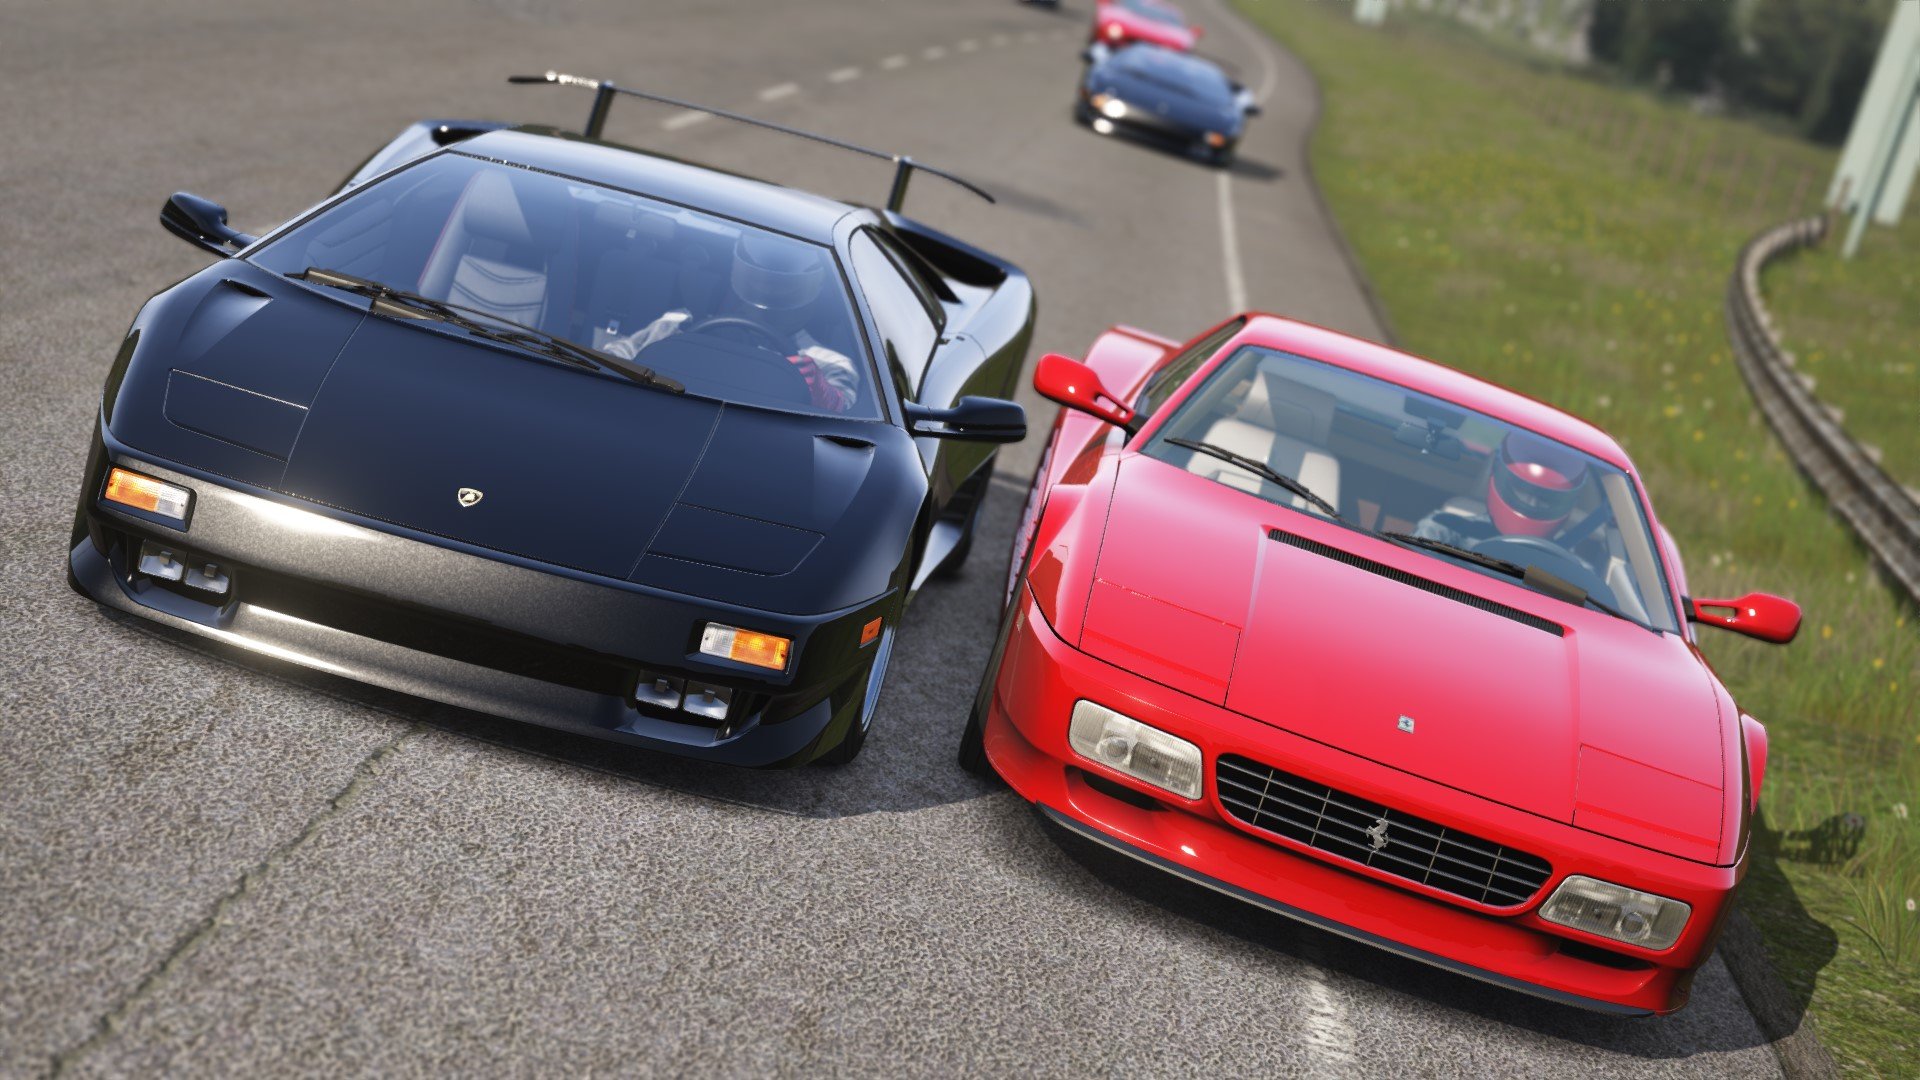 More information about "Assetto Corsa: Need for Speed Tournament Class A Mod v1.4"